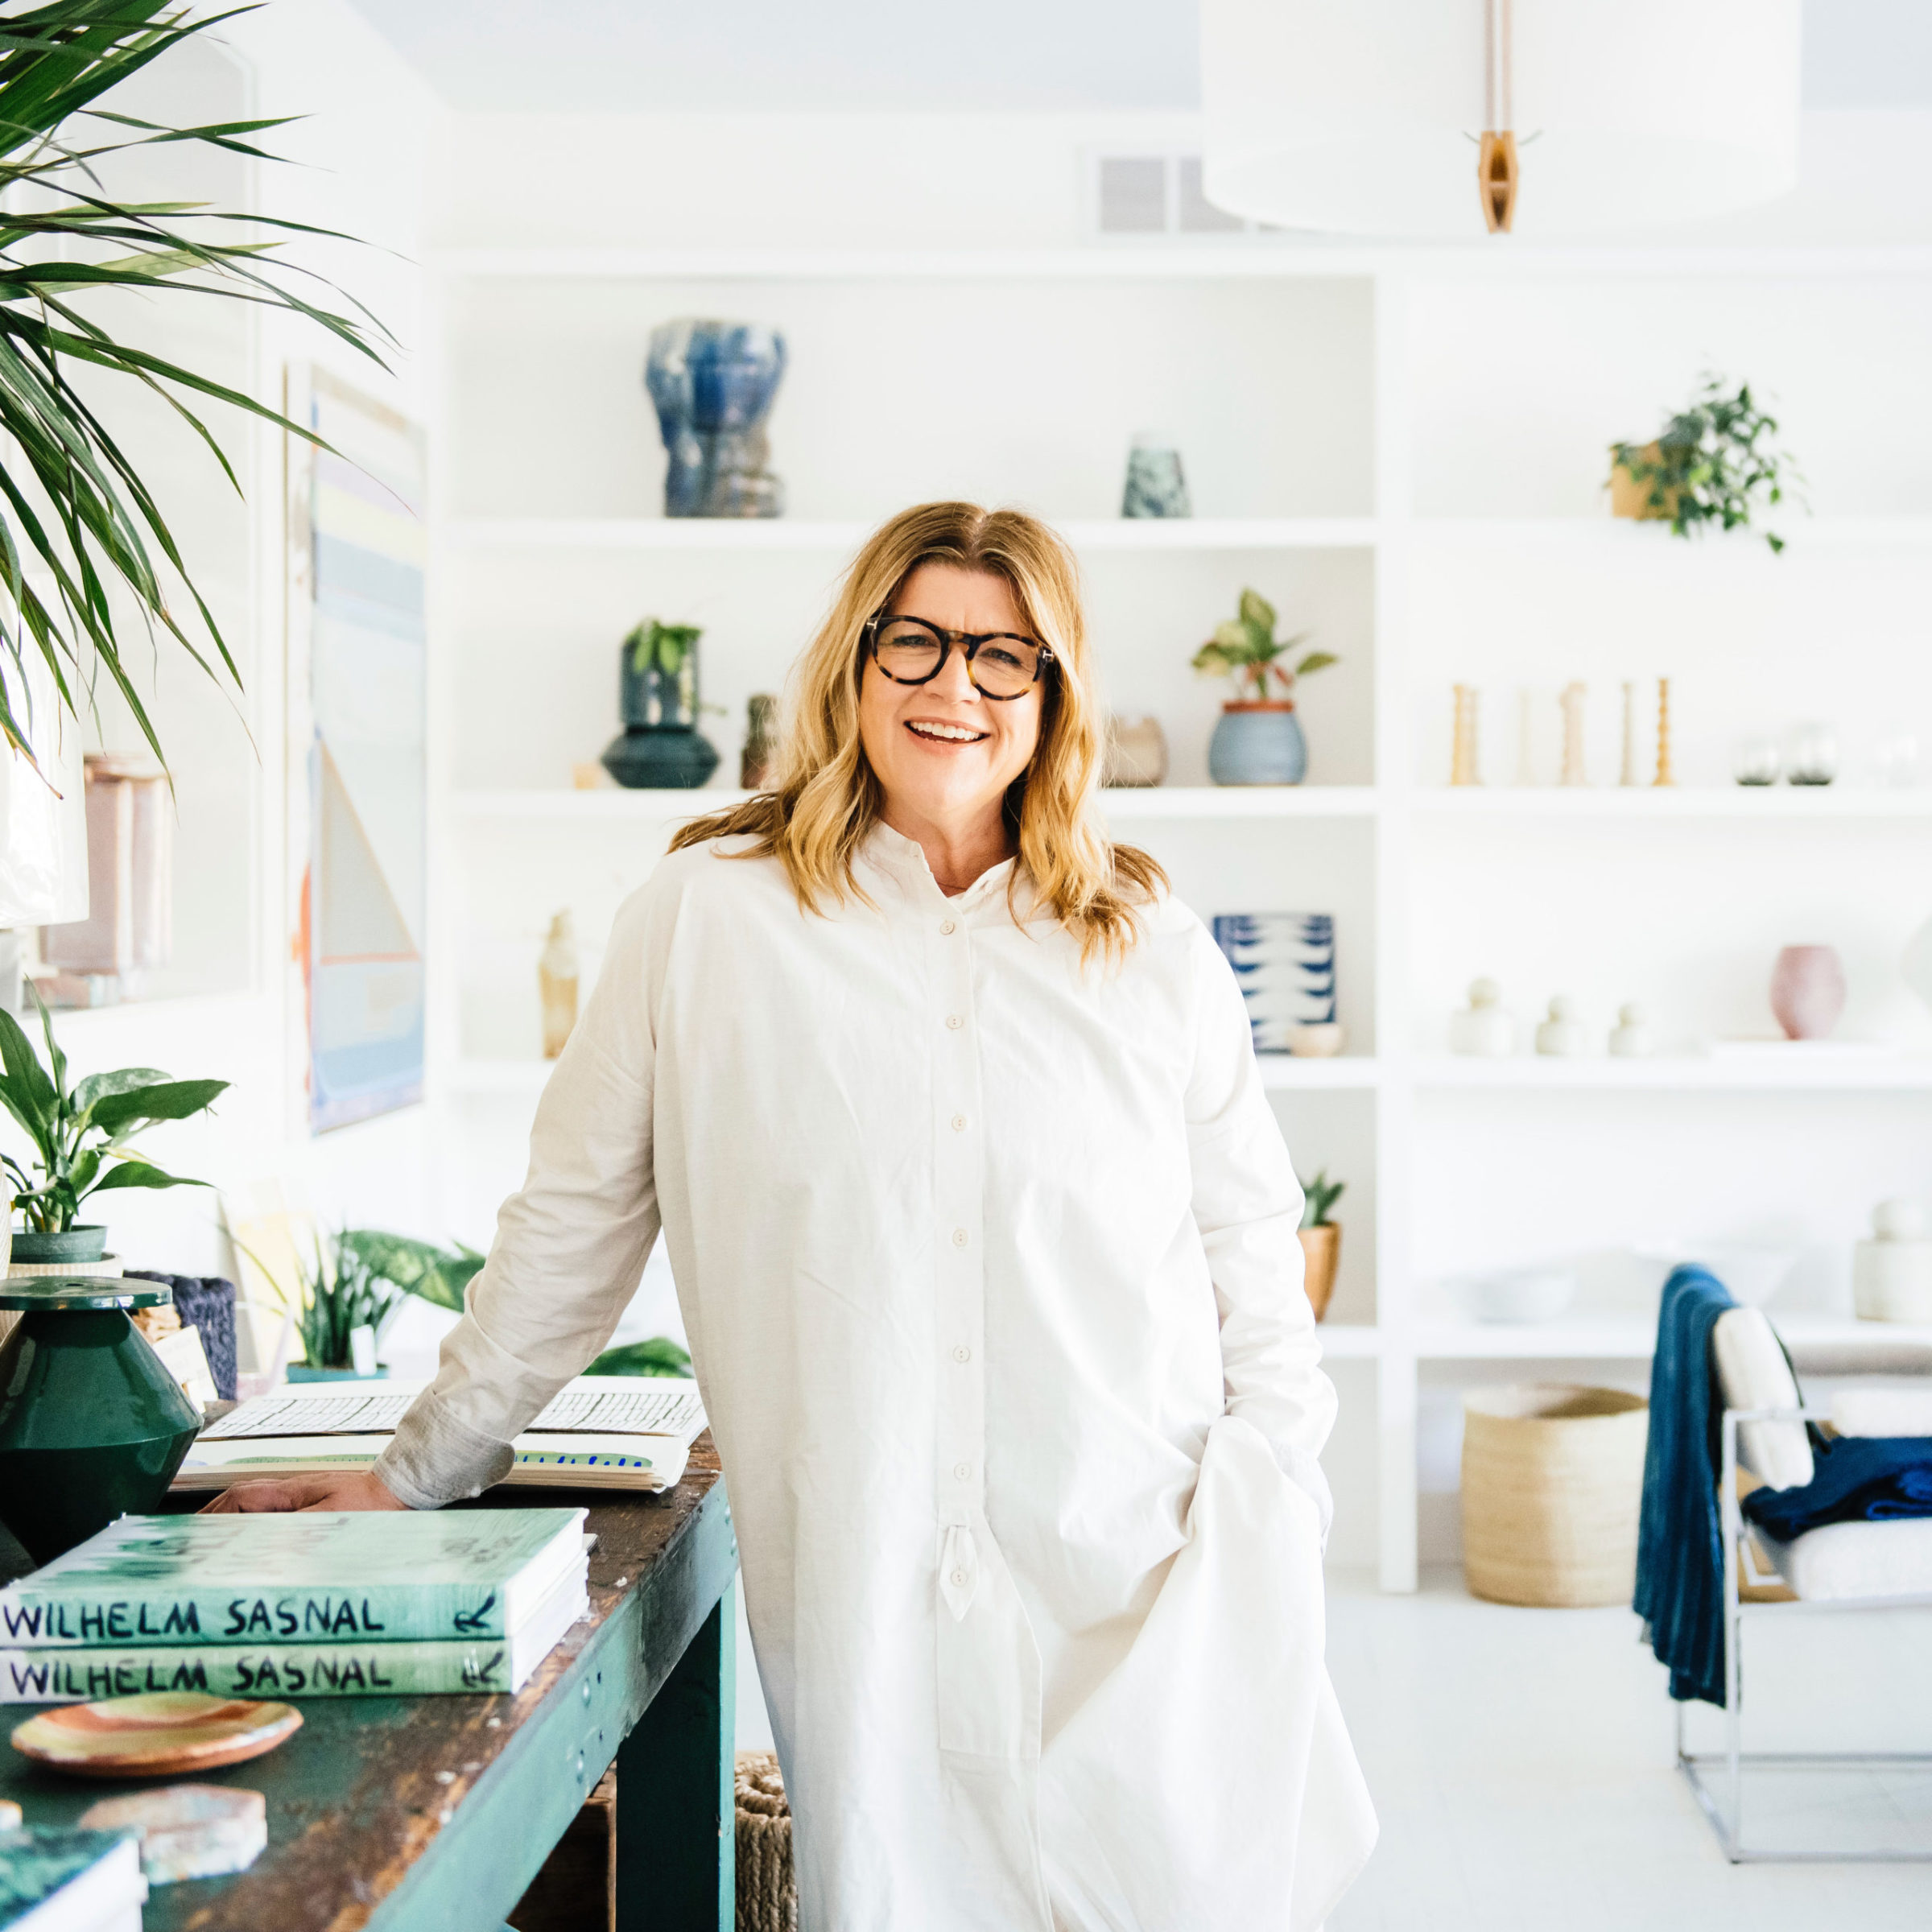 Sojourn founder Stacia Garriott Kass at her acclaimed home store in Sawyer, Michigan.